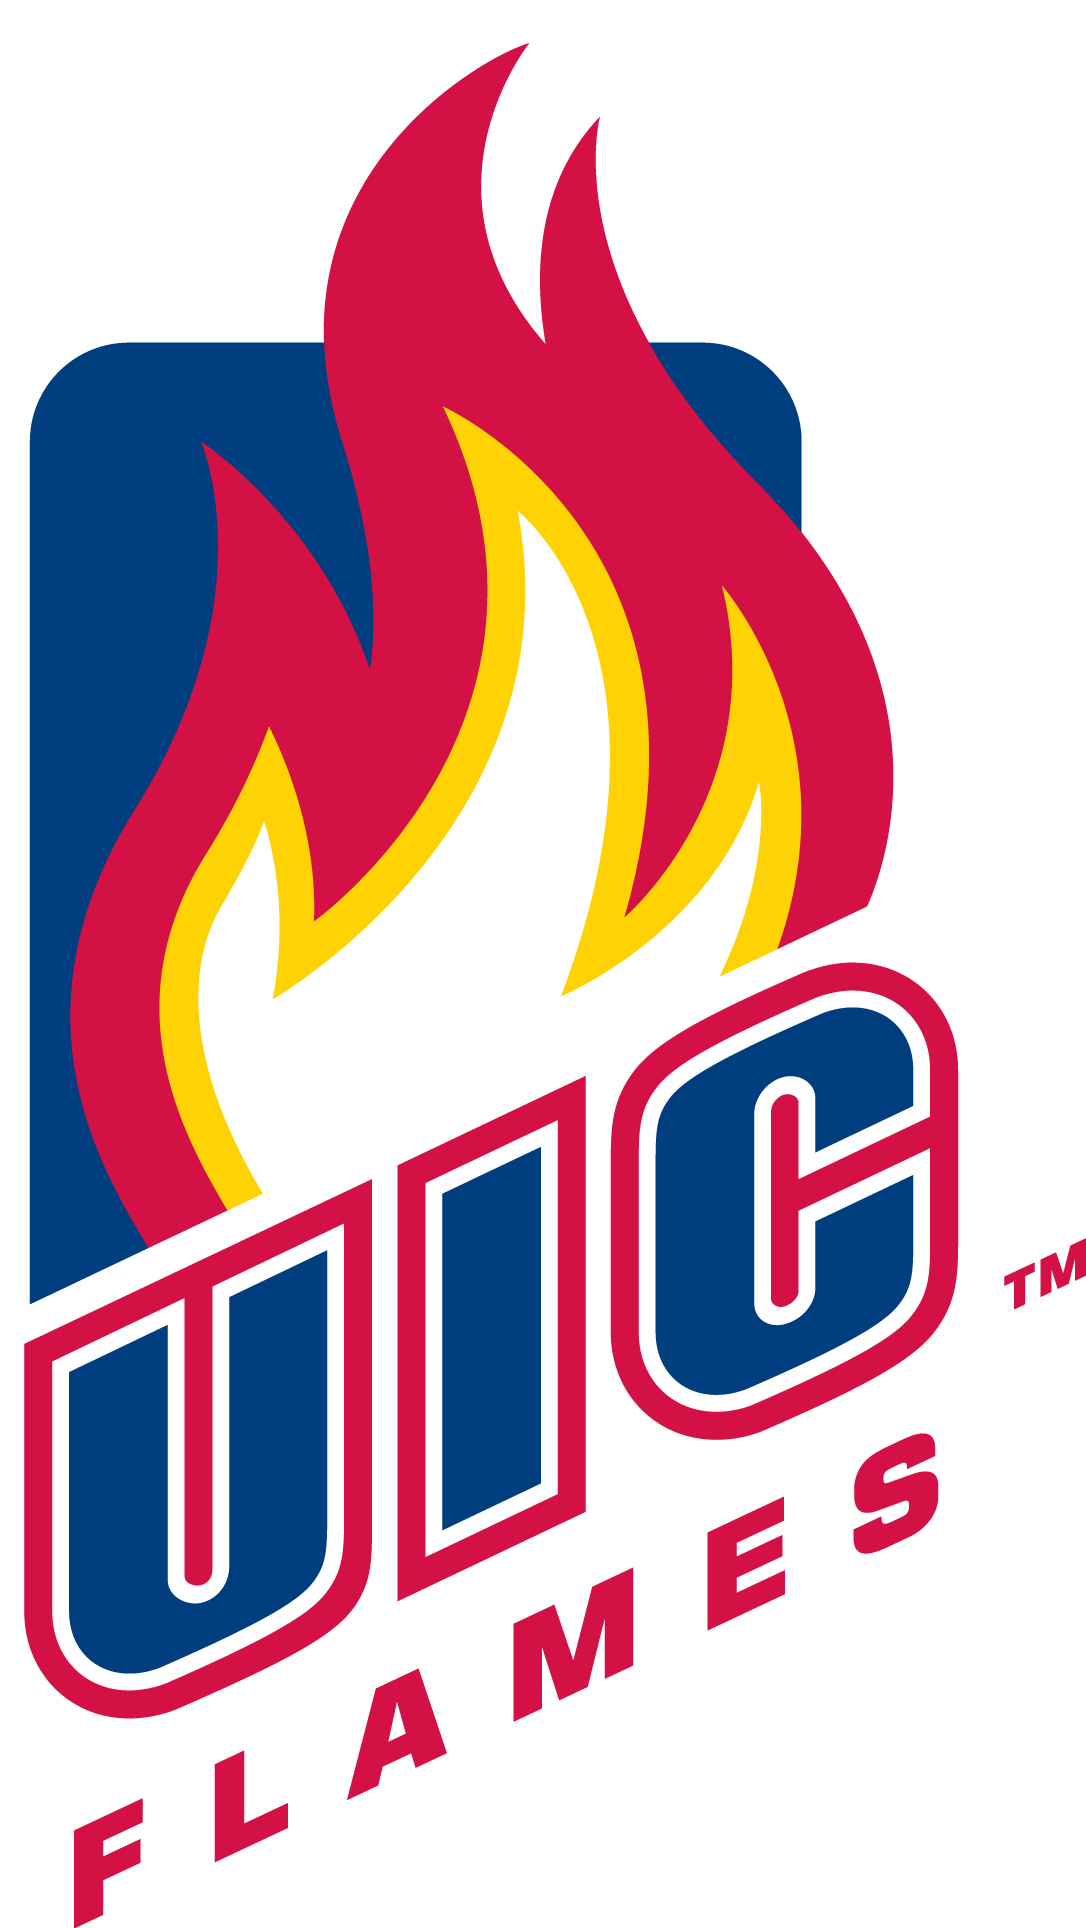 Talented Spanish Forward David Ramon Joins Uic The Catch And Shoot